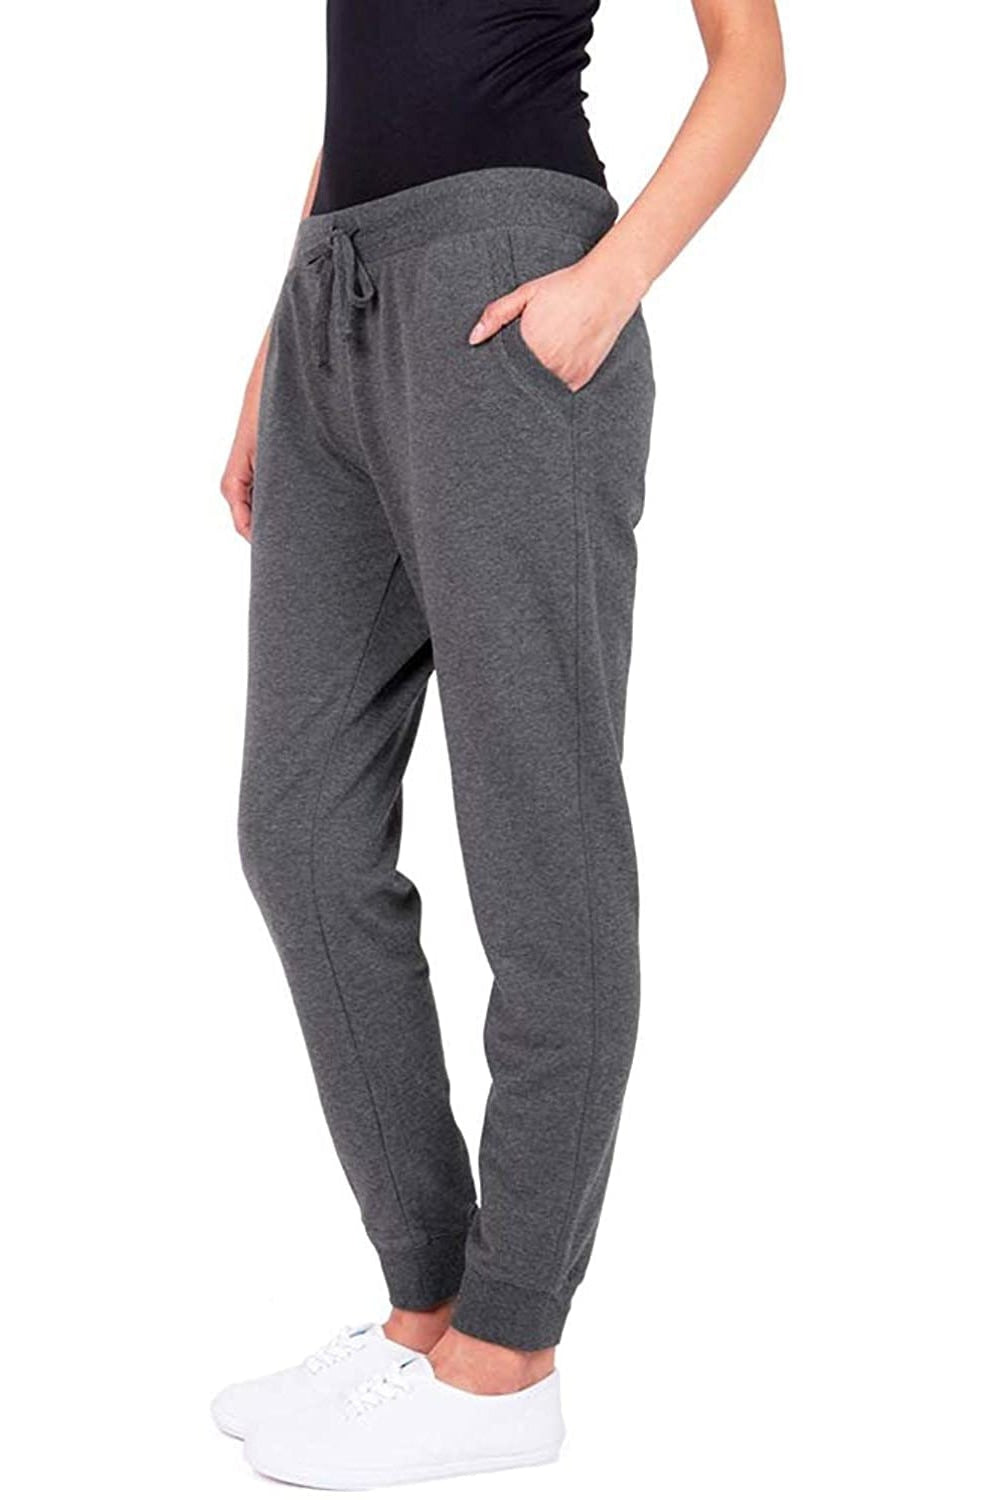 Enamor Women's Cotton Modal Woven Printed Pull-On Pants E4A3 – Online  Shopping site in India